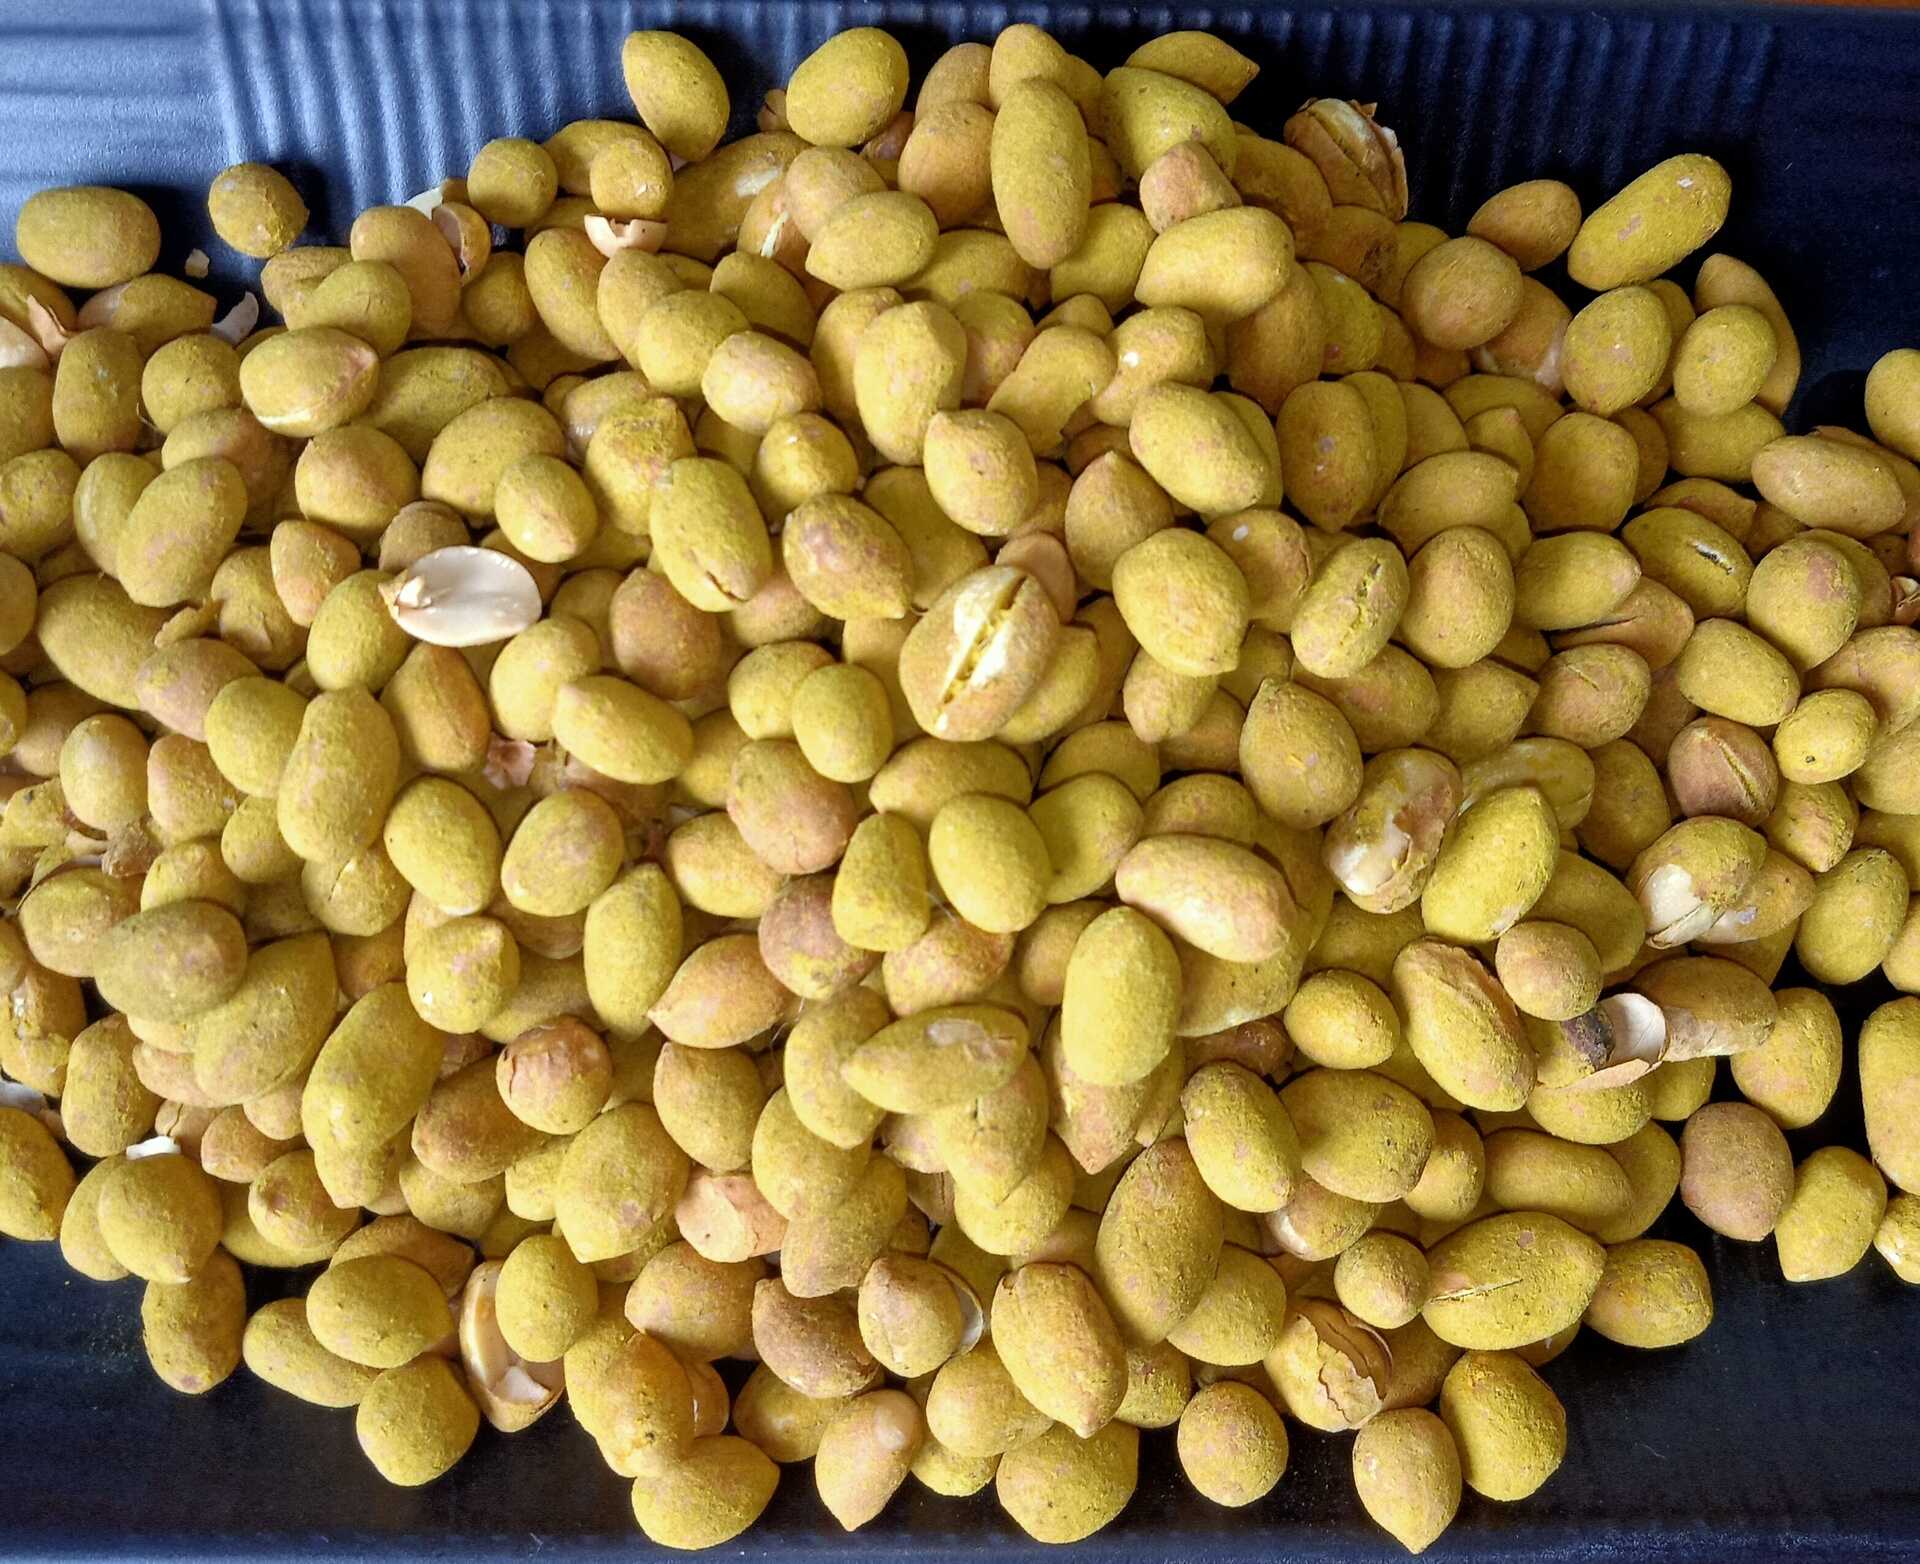 How To Store Green Peanuts